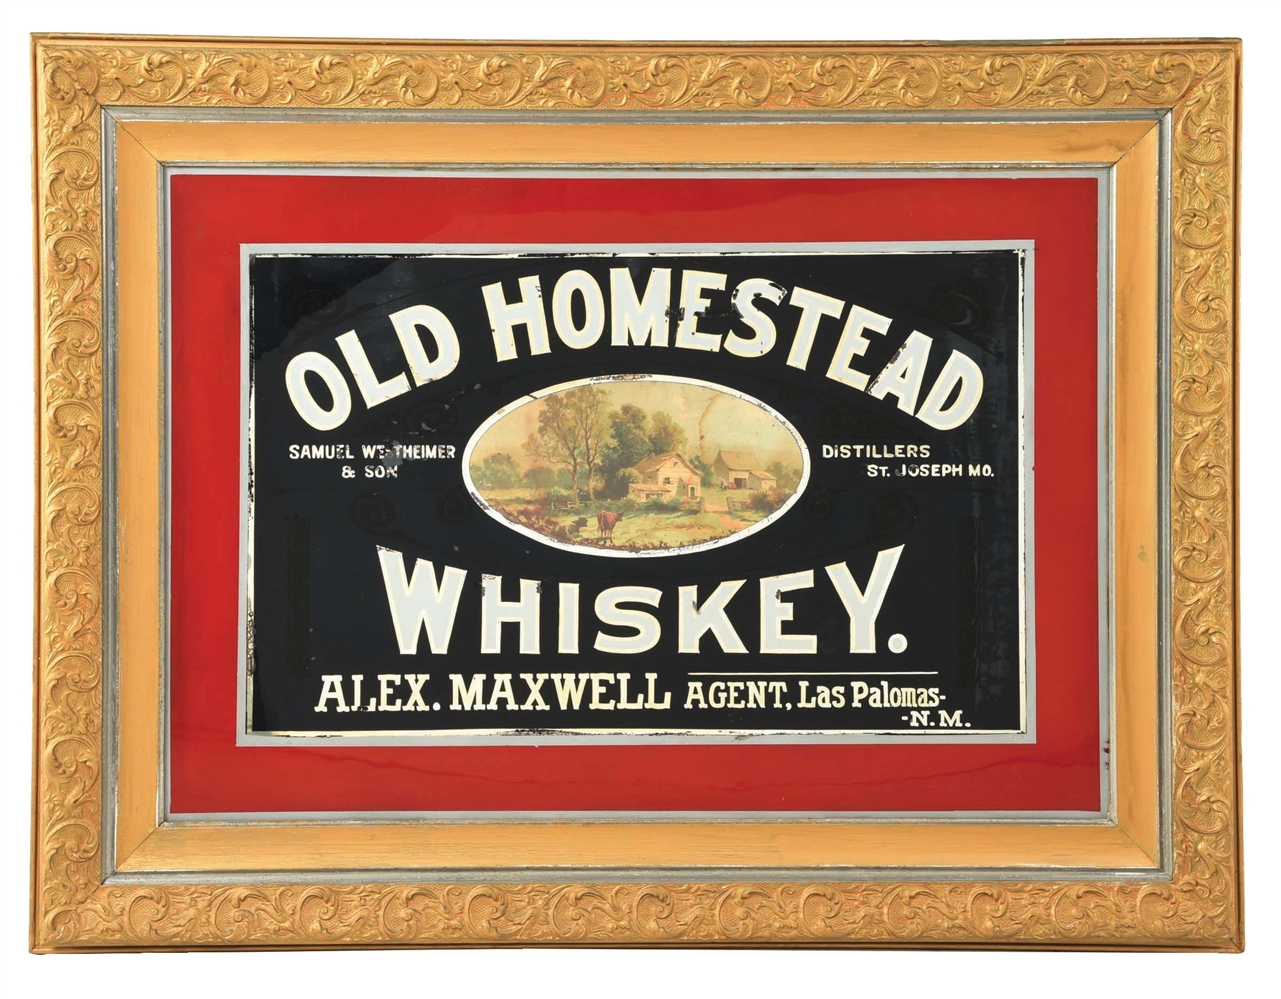 FRAMED OLD HOMESTEAD WHISKEY REVERSE PAINTED GLASS ADVERTISEMENT.